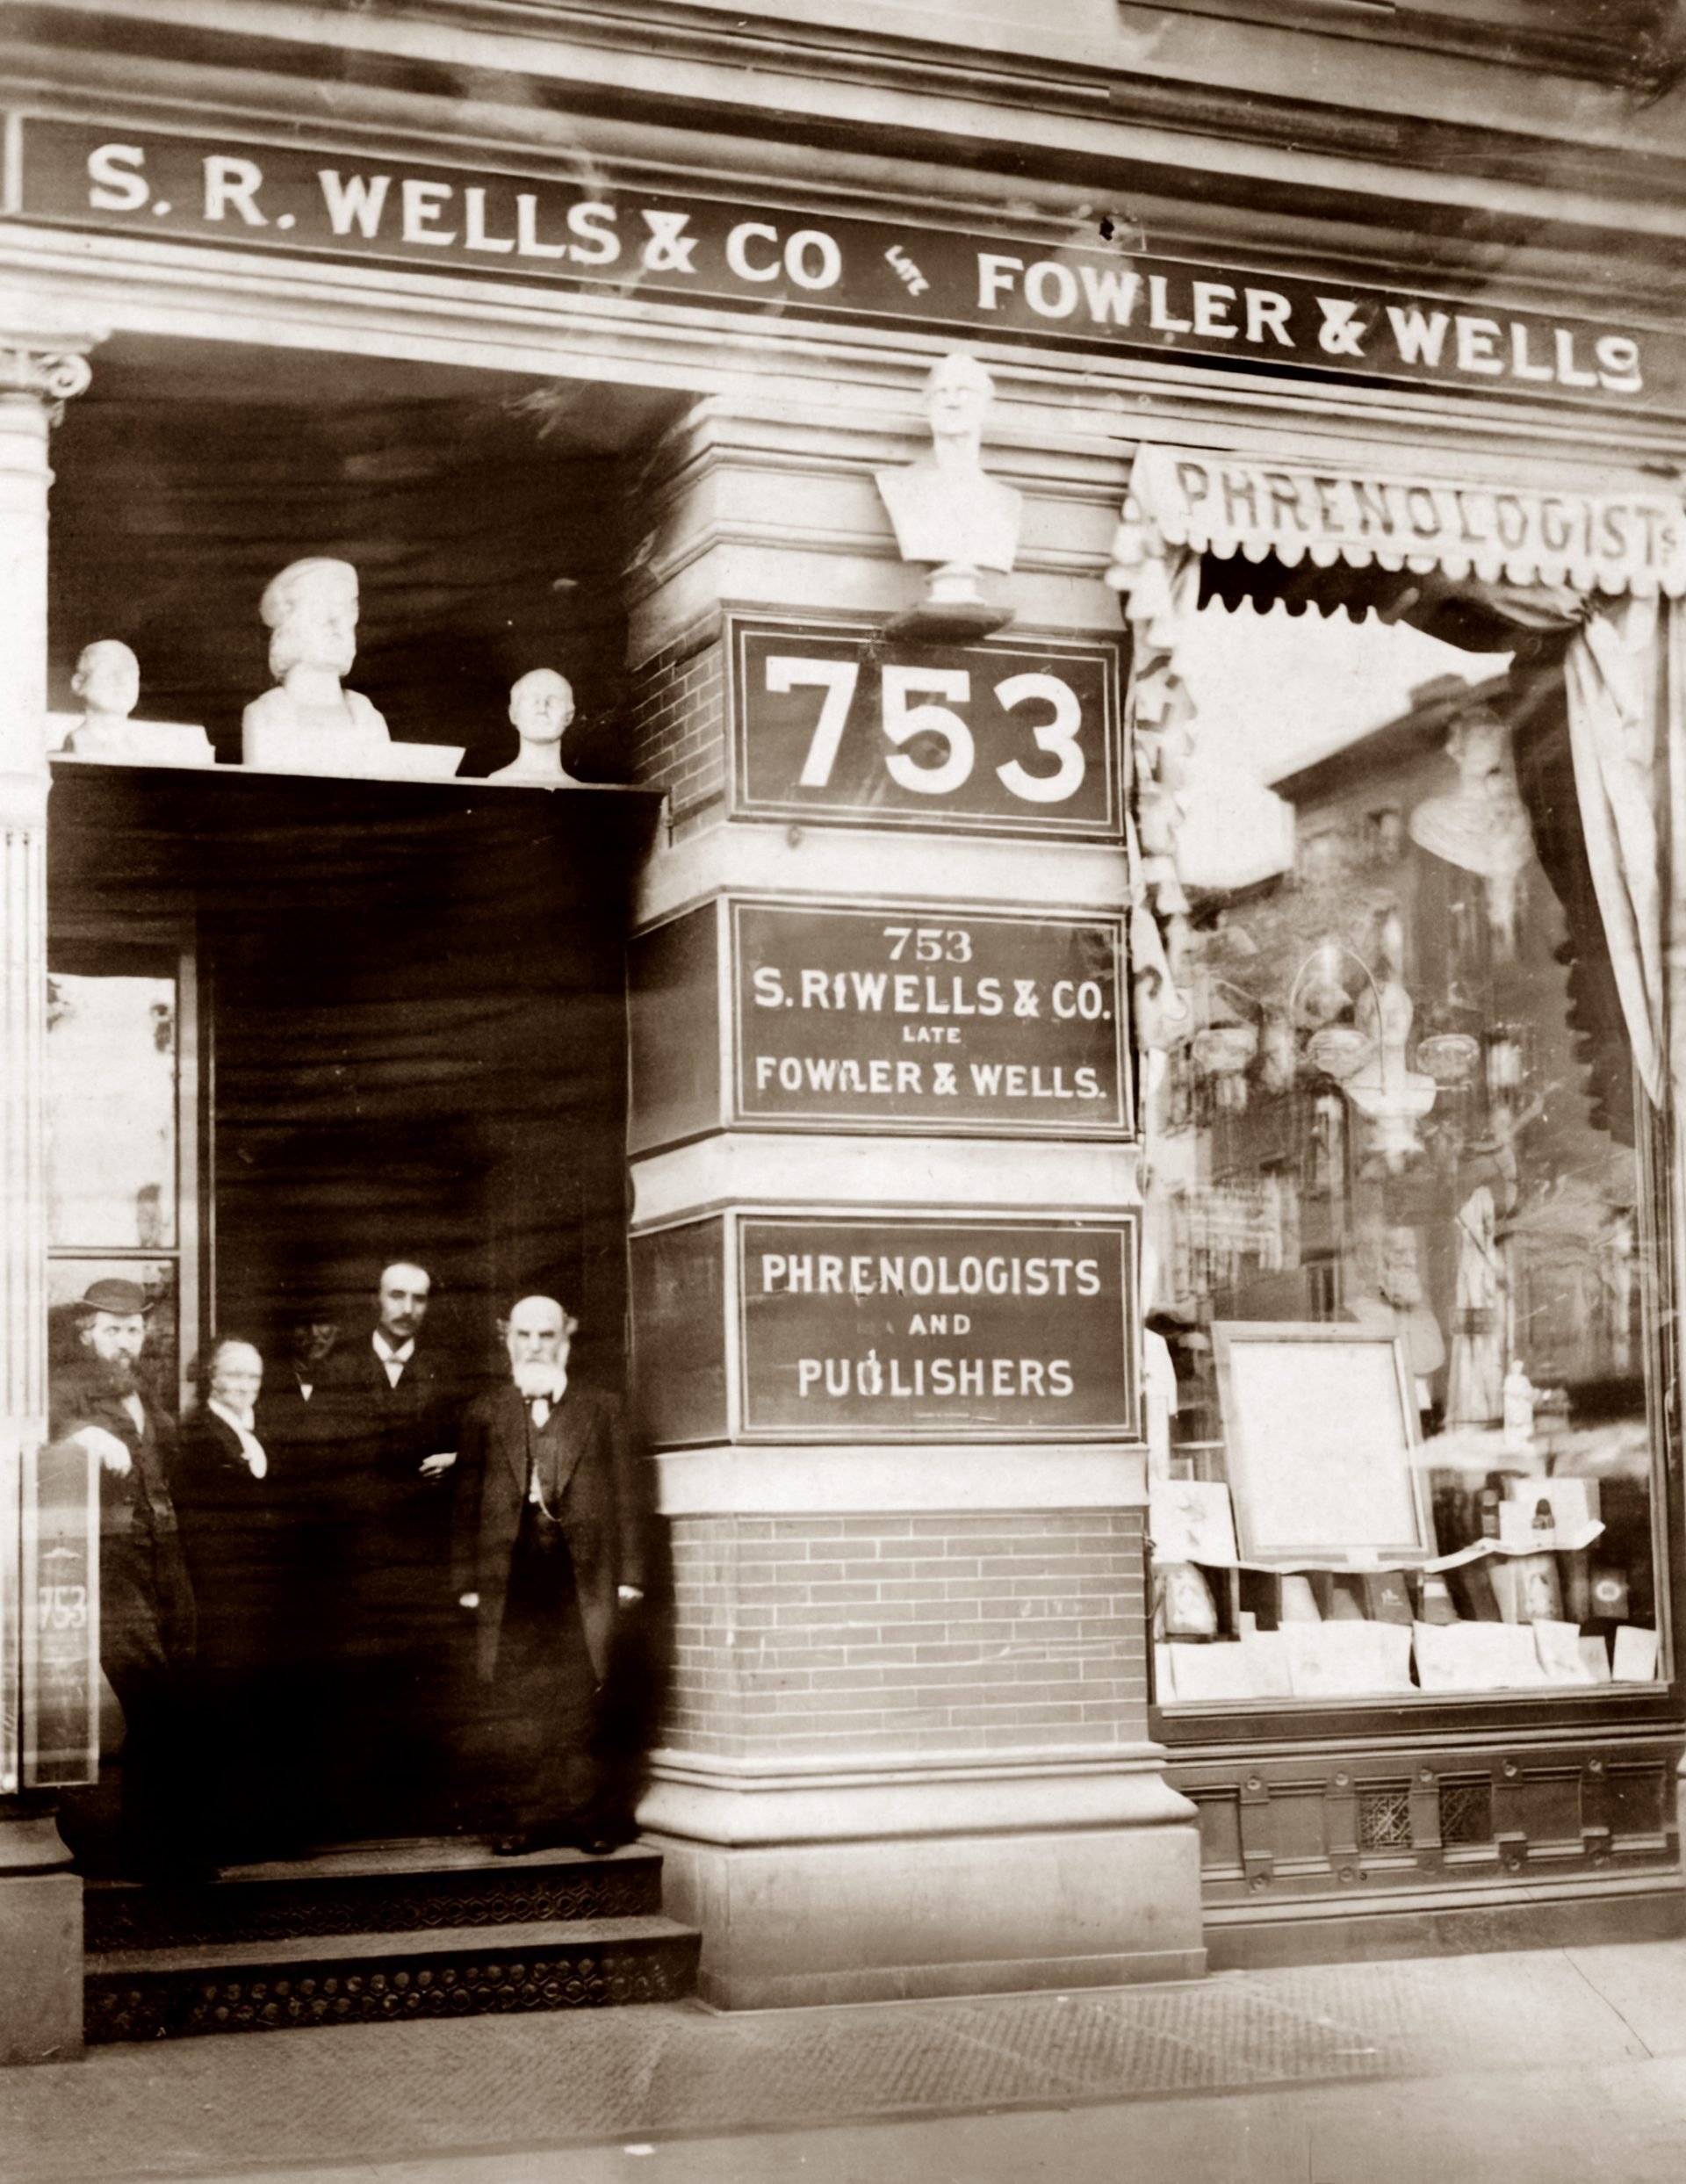 Samuel R. Wells, Charlotte Fowler Wells, Lorenzo N. Fowler, and two other men stand at the entrance of S.R. Wells & Co., previously known as Fowler & Wells, Phrenologists and Publishers.